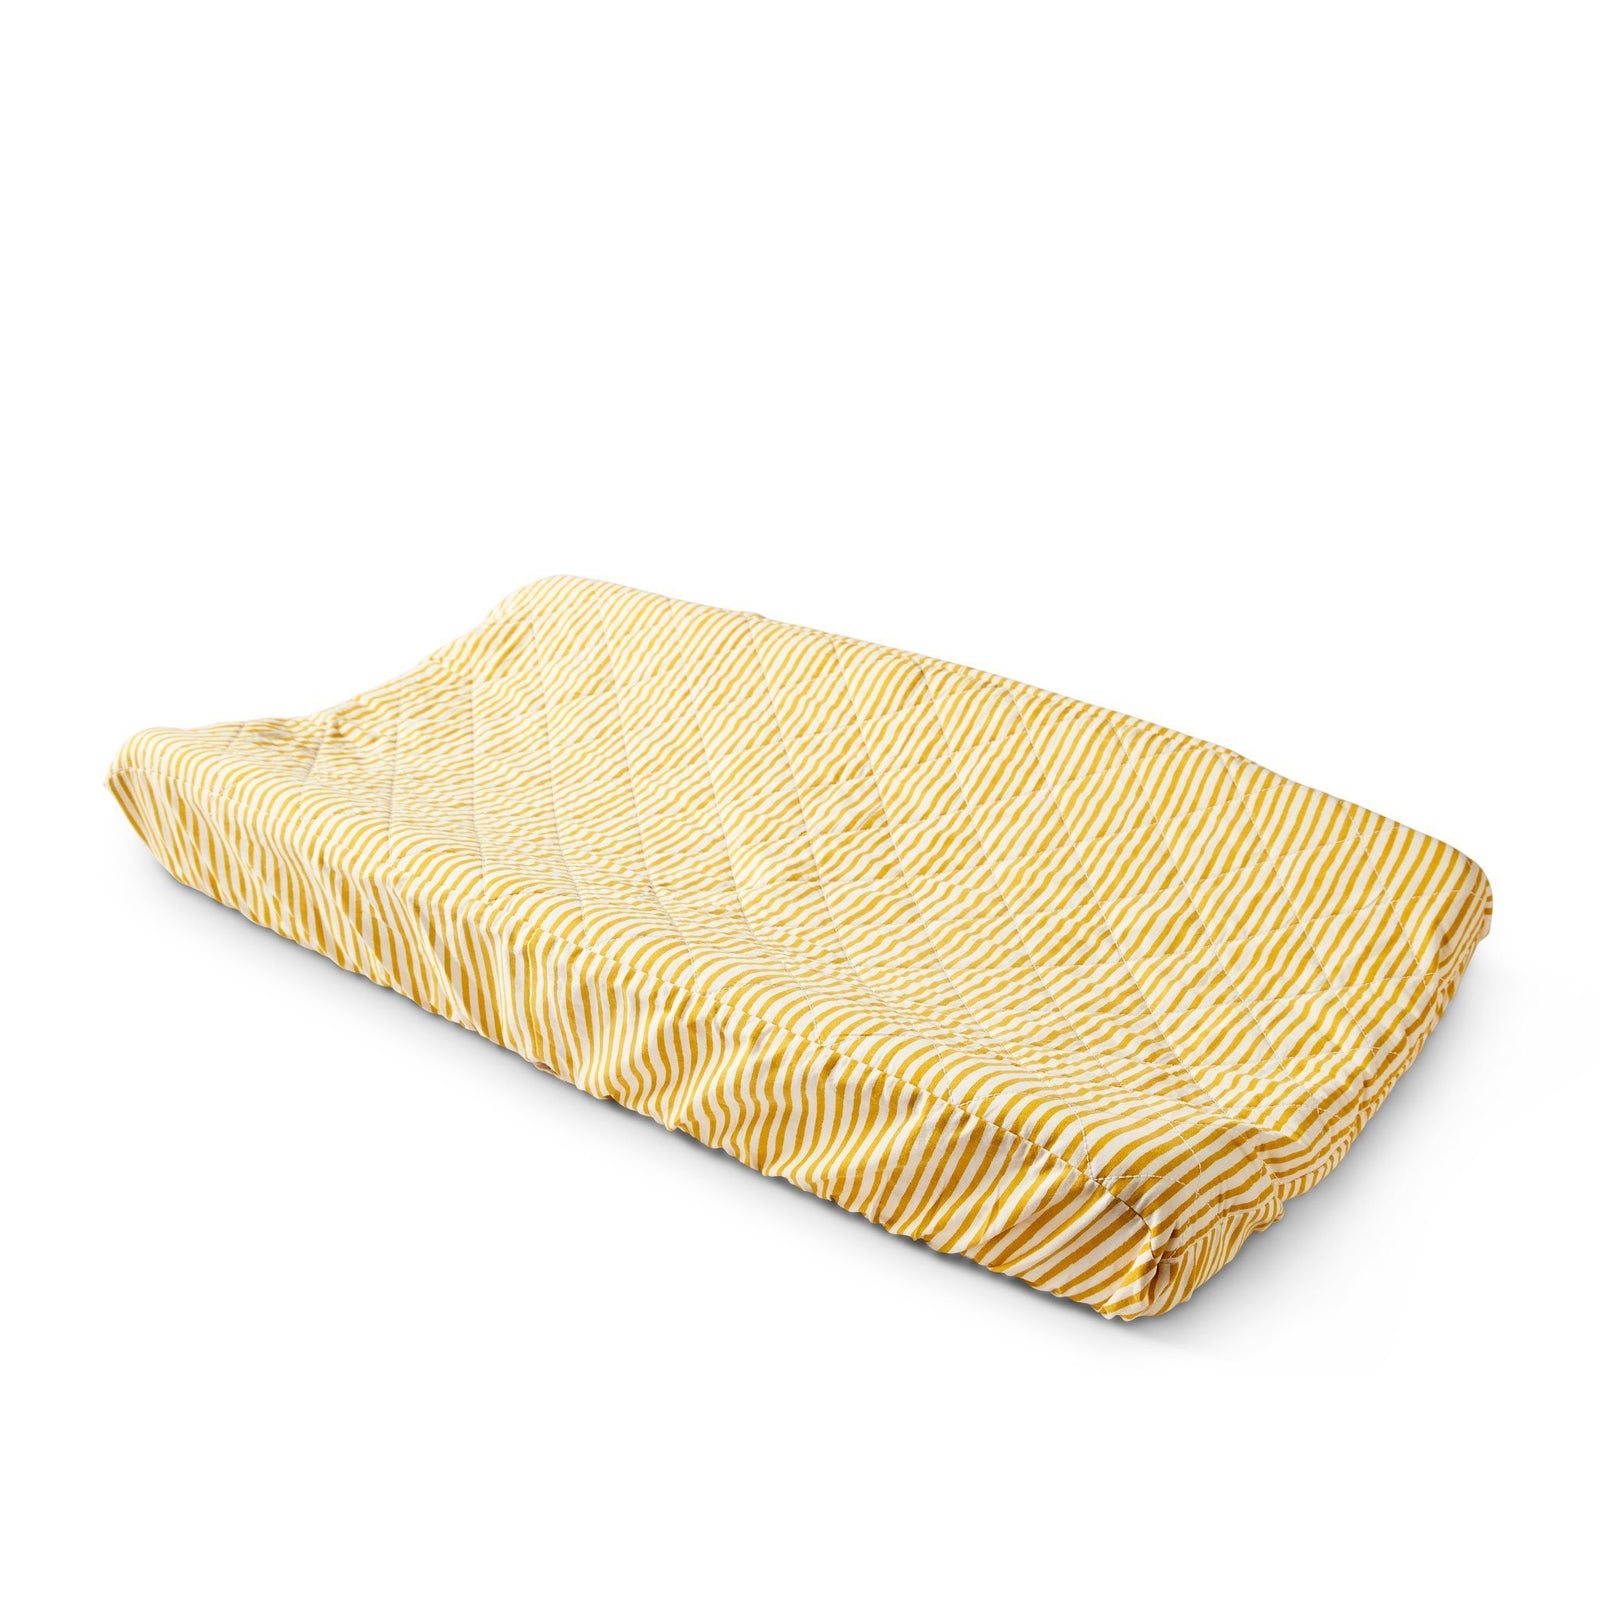 Pehr Stripes Away Marigold Change Pad Cover. Hand printed. White with gold stripes.